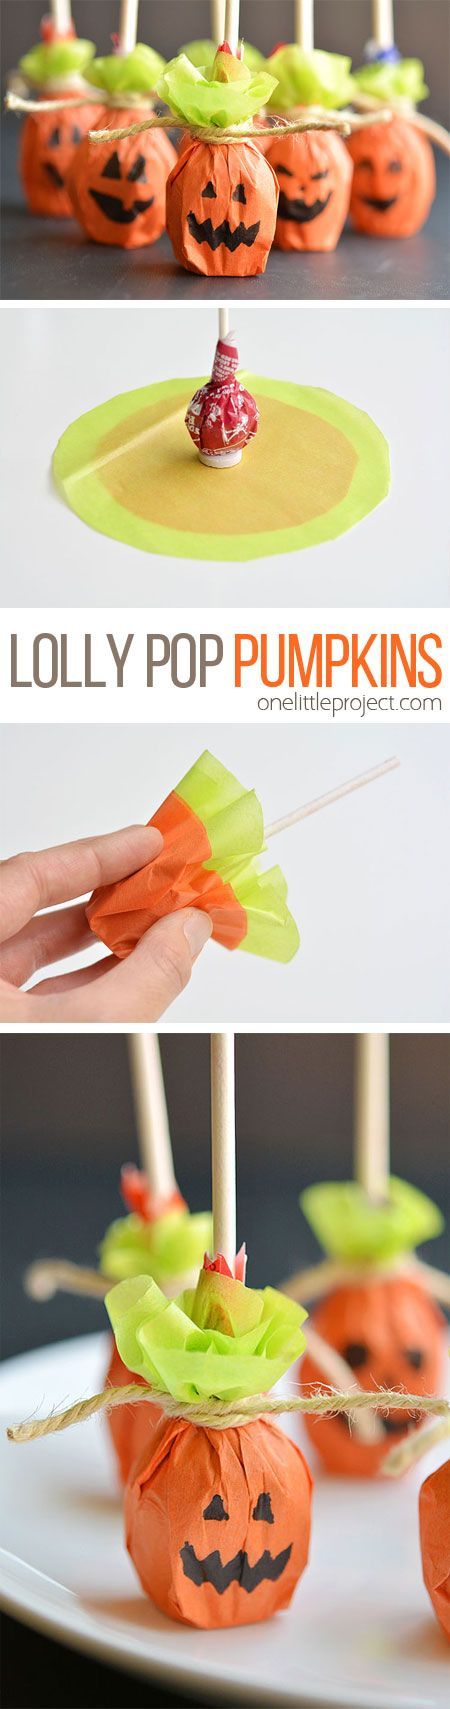 These pumpkin lolly pops are SO EASY to make and theyre completely adorable!